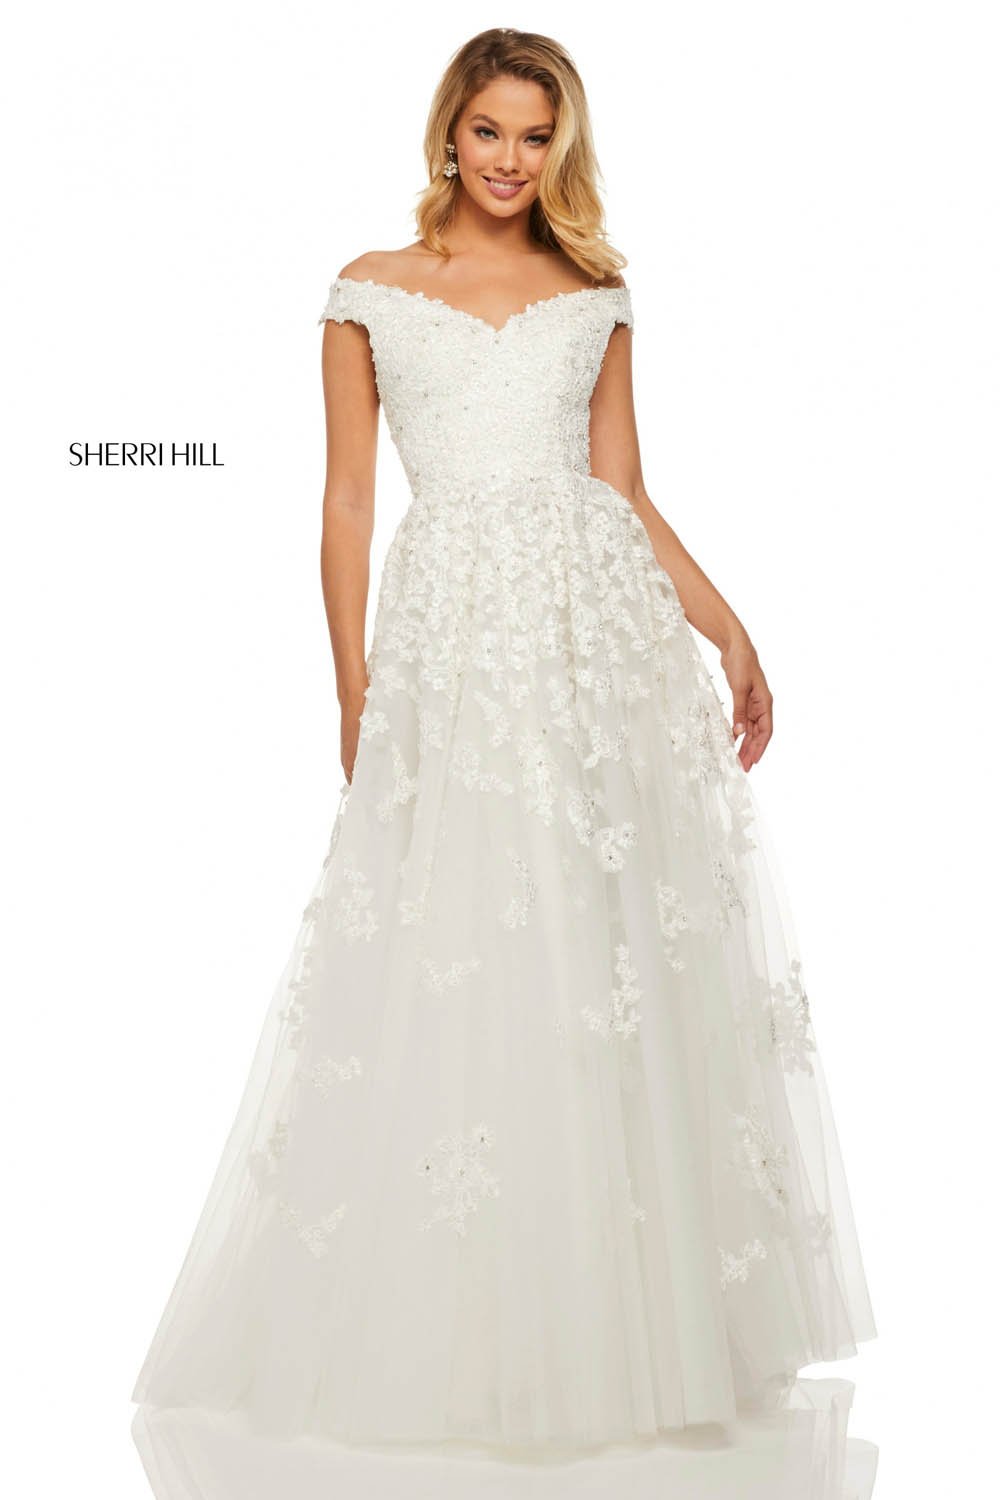 Sherri Hill 52879 dress images in these colors: Ivory.